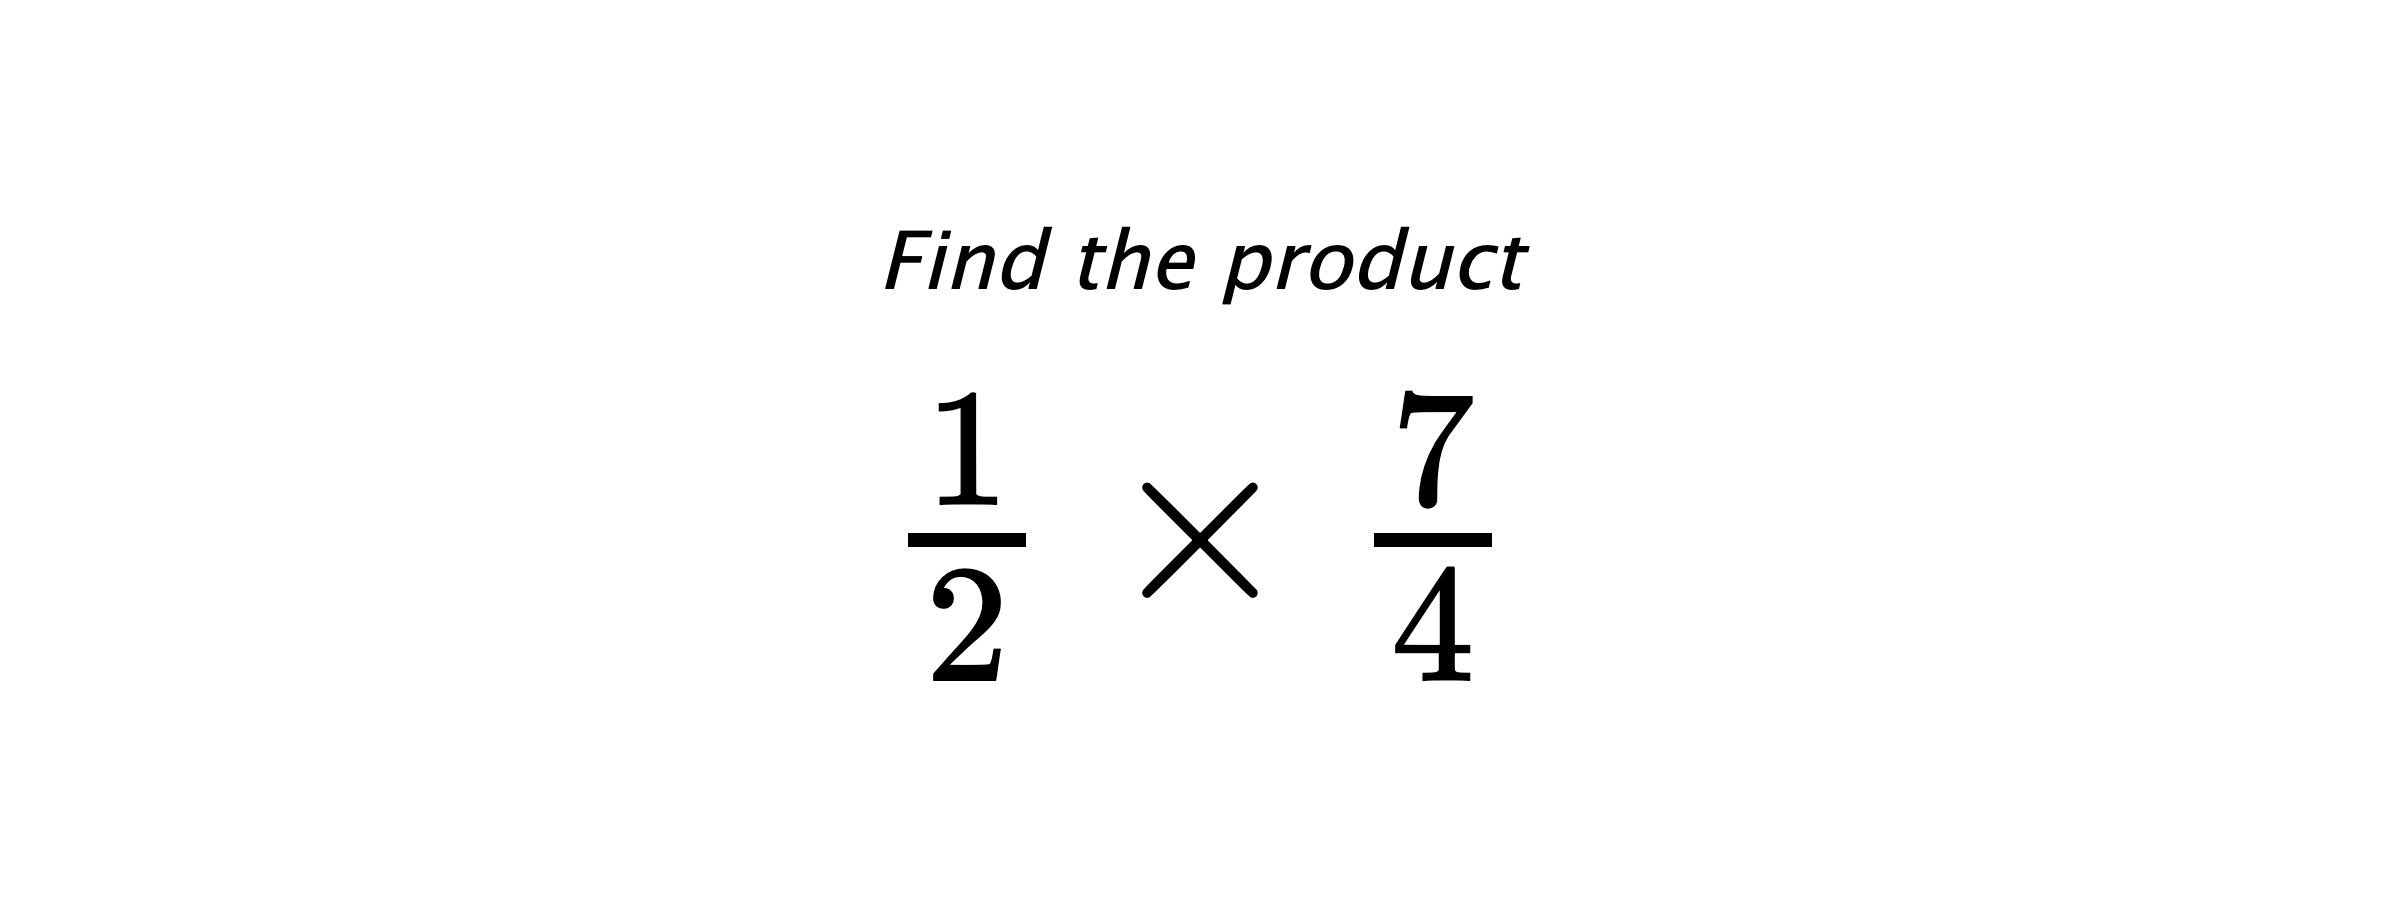 Find the product $ \frac{1}{2} \times \frac{7}{4} $